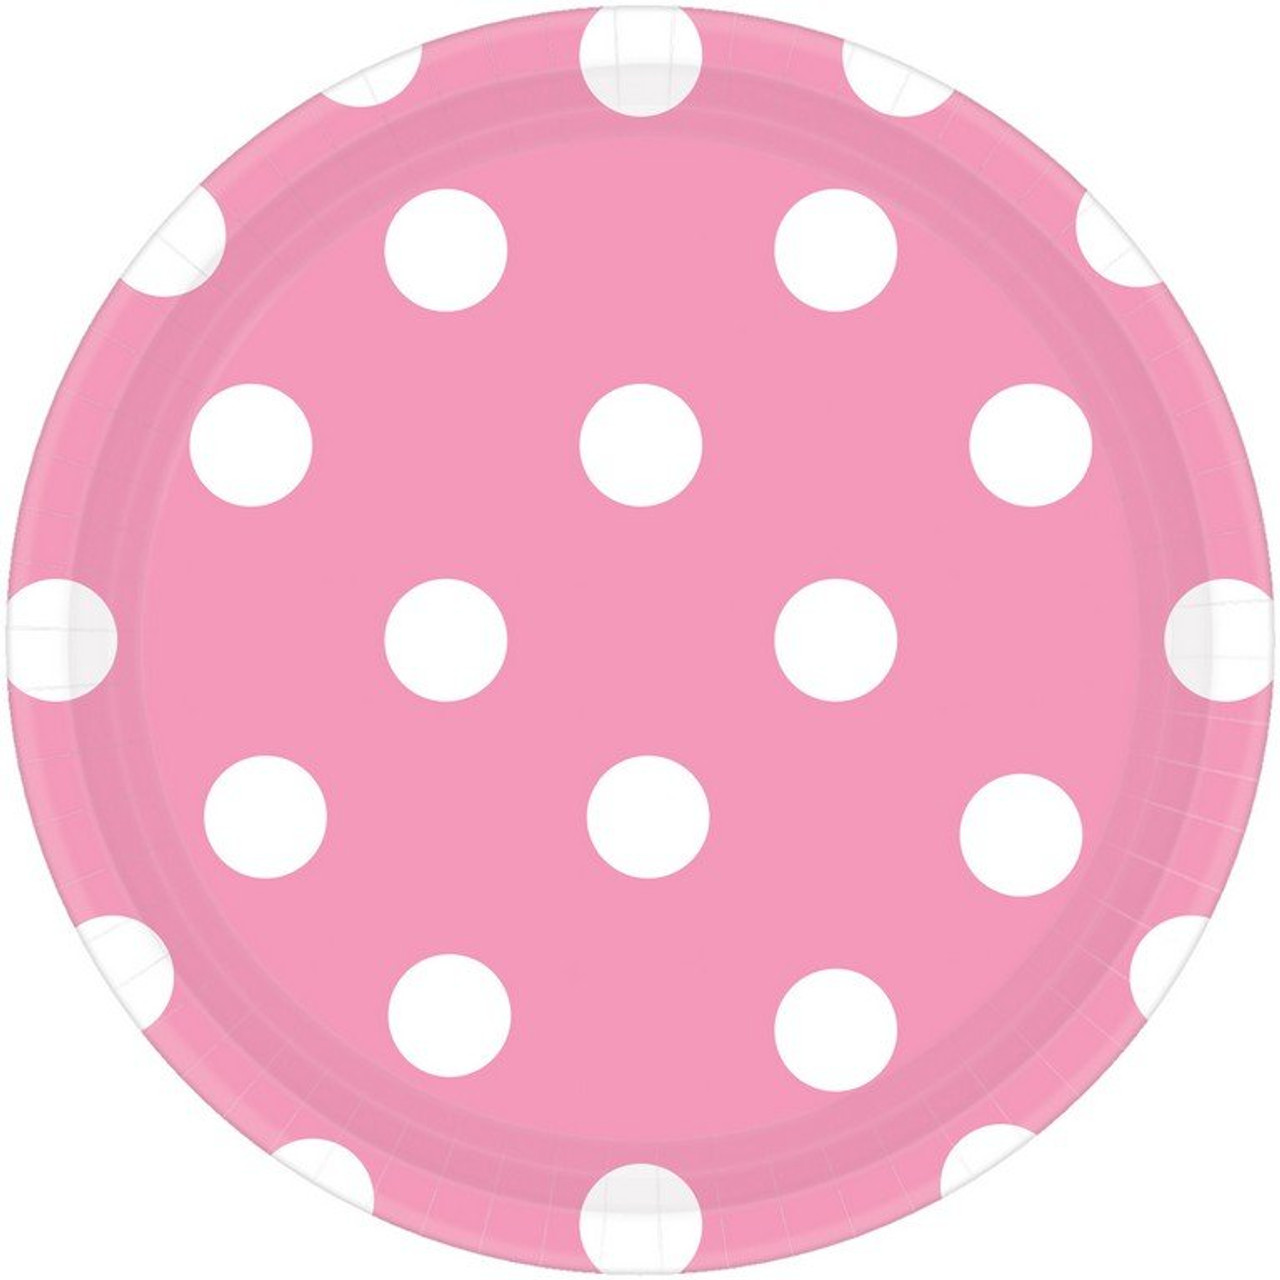 DOTS BRIGHT PINK PLATES 9 INCHES